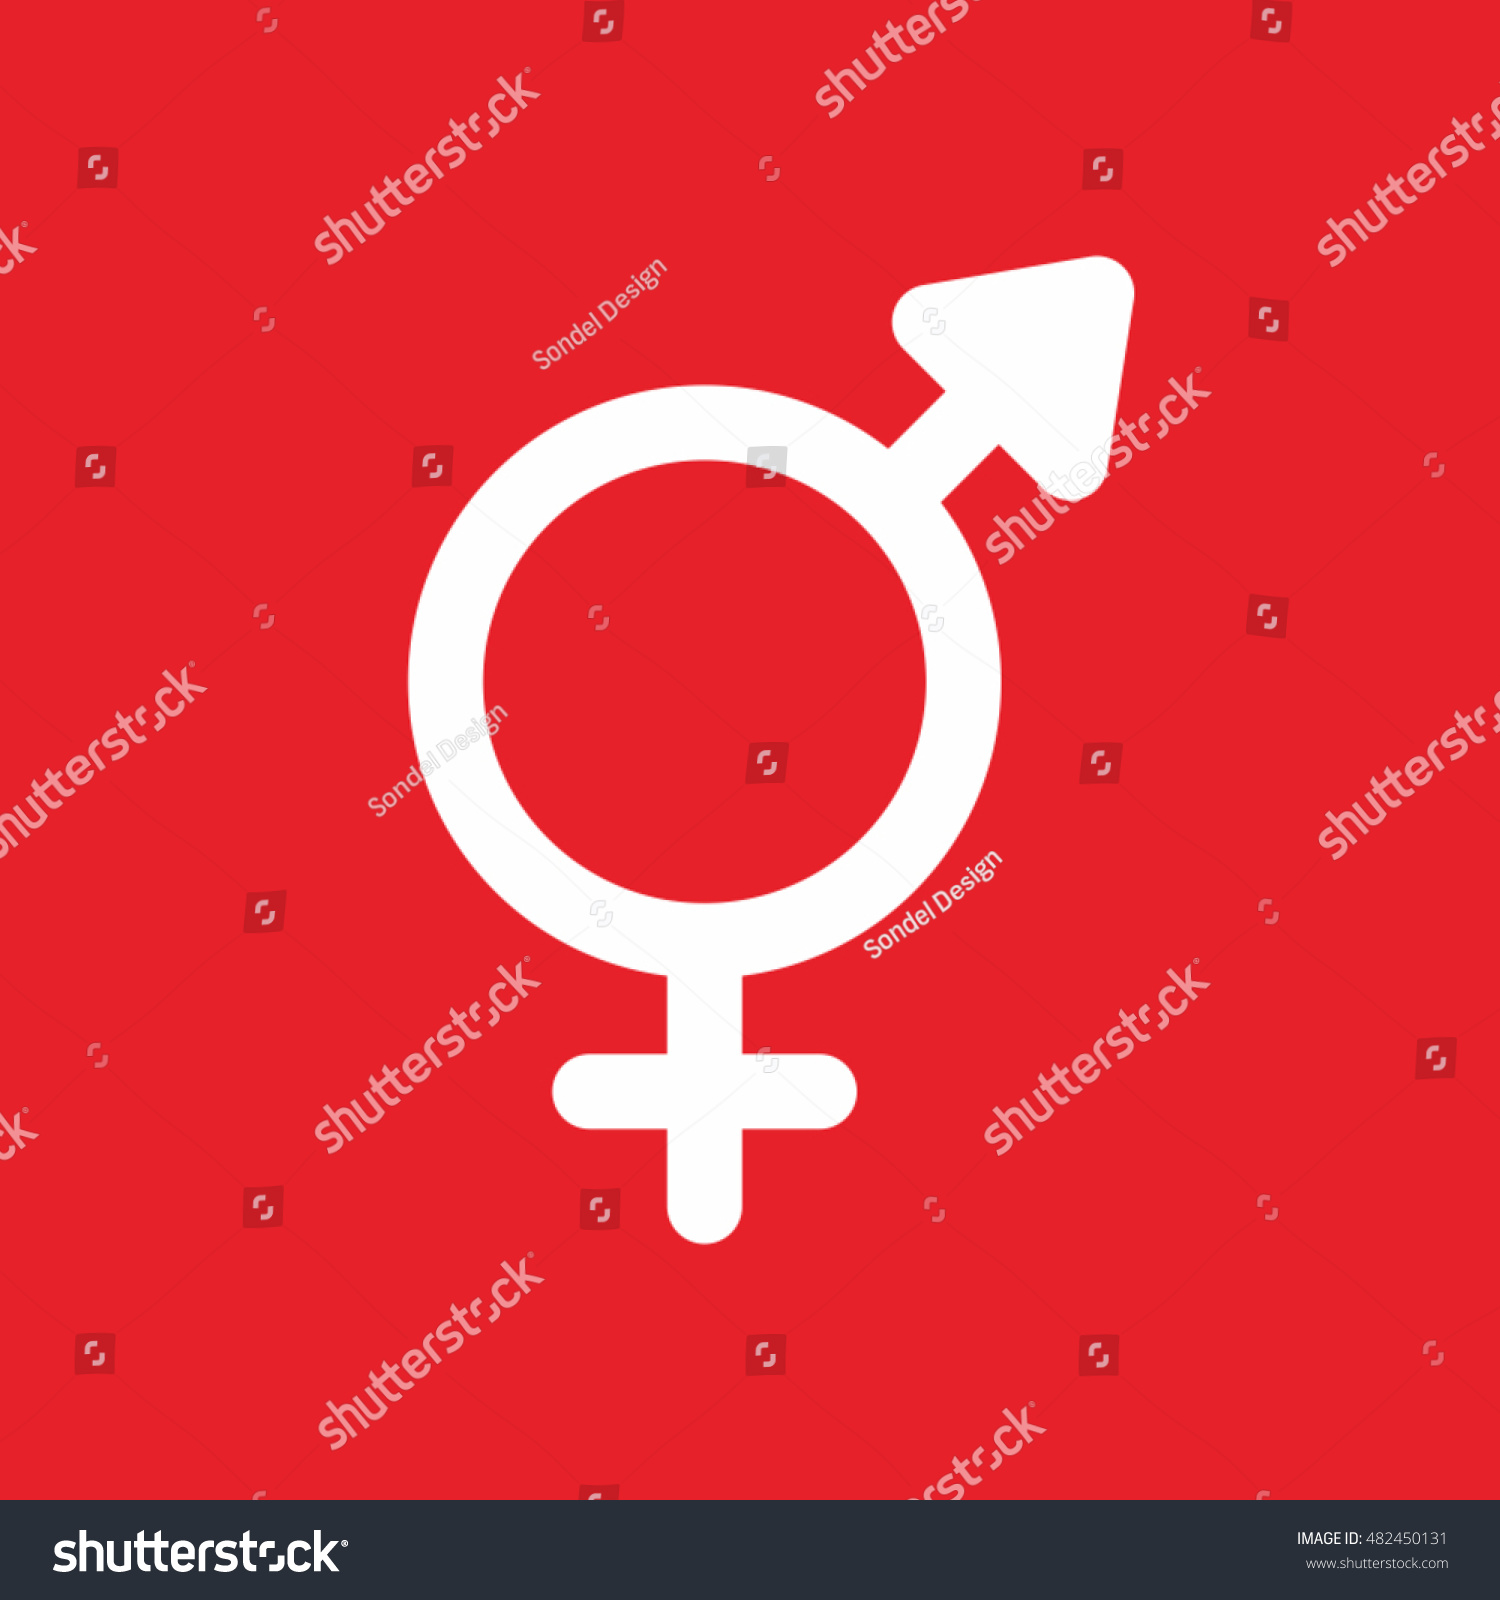 Sex Love Logo Red Background Stock Vector Royalty Free 482450131 Shutterstock 